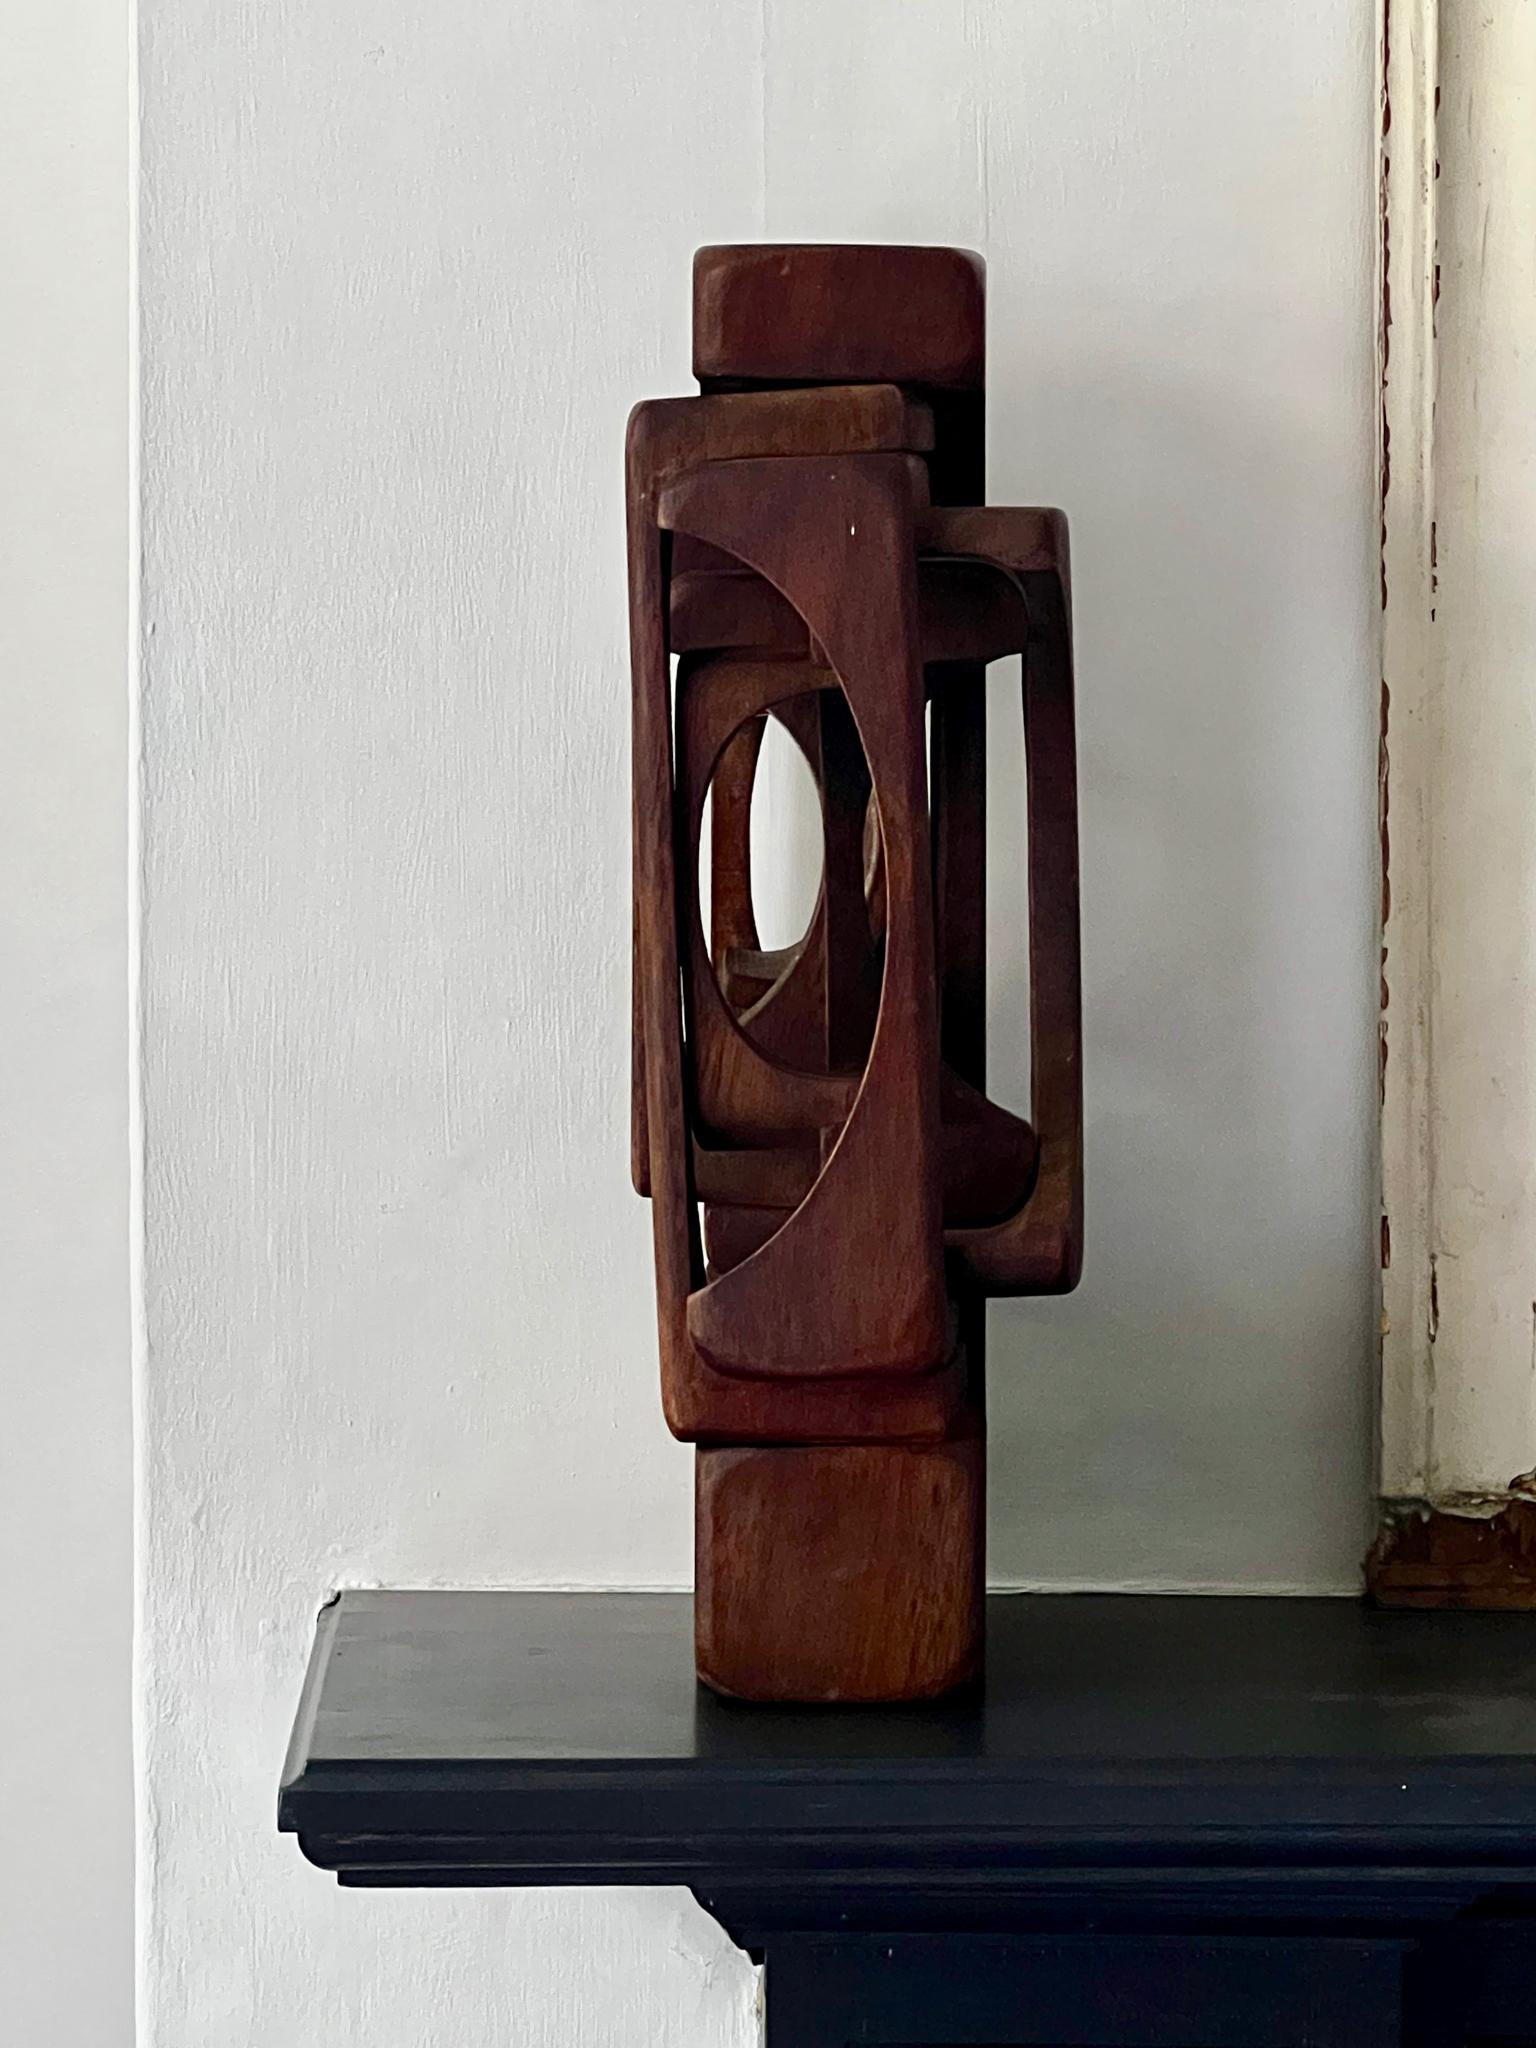 Late 20th Century Wooden Sculpture by Brian Willsher, Signed and Dated, England, 1978